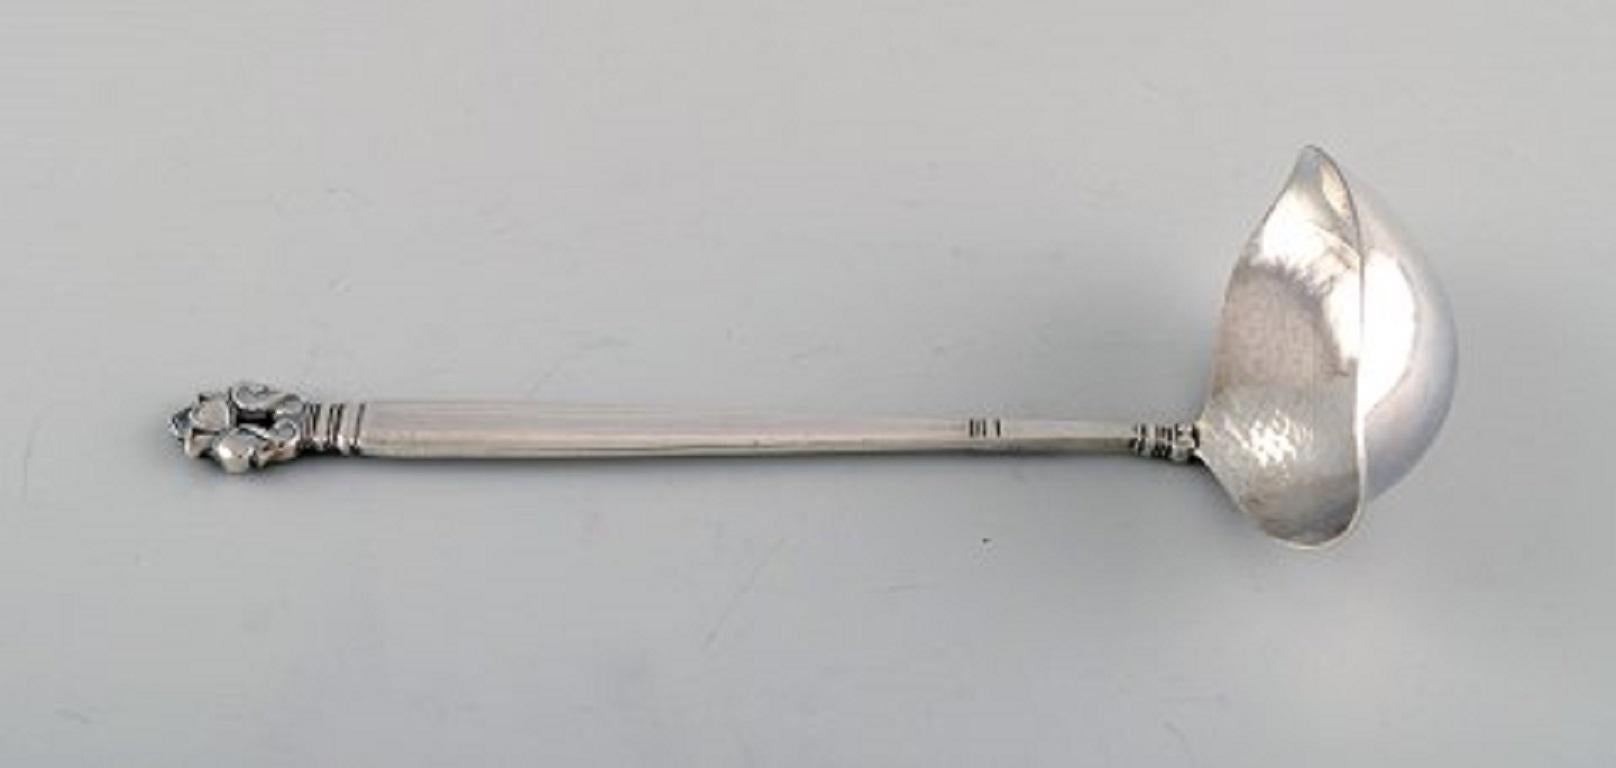 Georg Jensen Acorn sauce spoon in sterling silver.
Measure: Length 20.5 cm.
In very good condition.
Stamped.